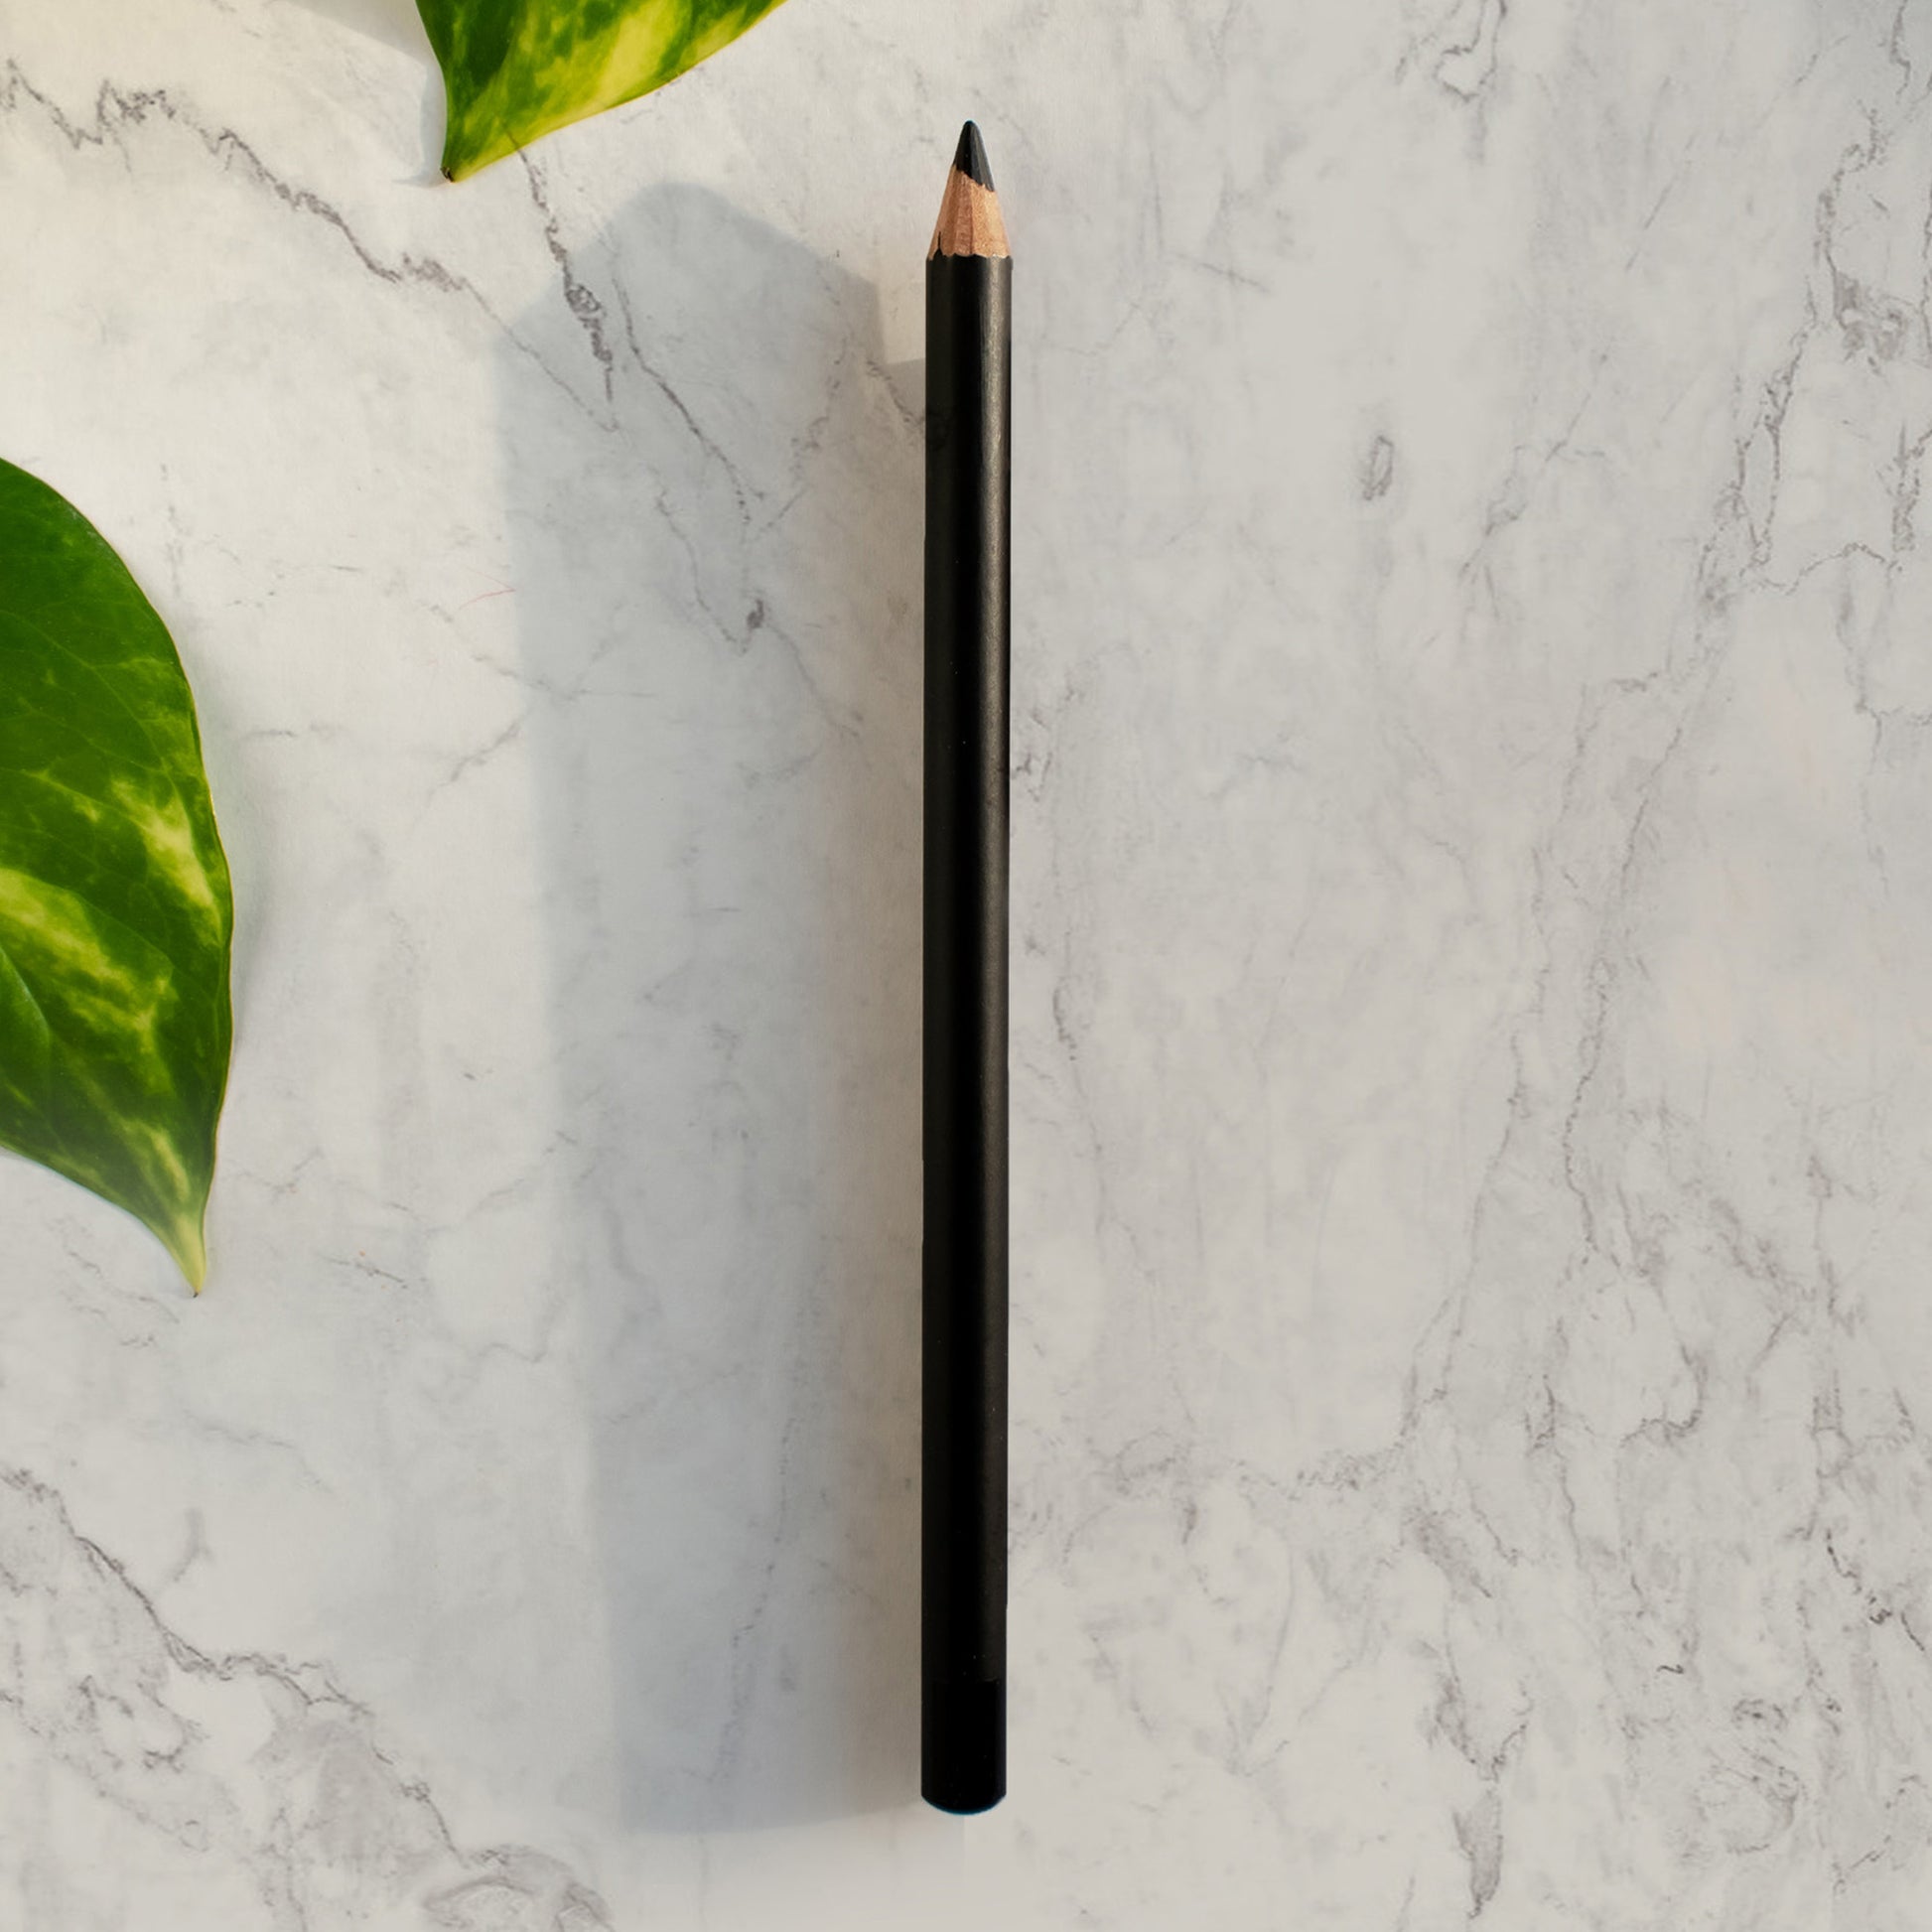 Discover Cruisin Organics Sand Lip Pencil - perfect for your beach beauty routine! Formulated with SPF, it offers sun protection and a natural finish for your day at the beach. Expertly crafted, vegan-friendly application.